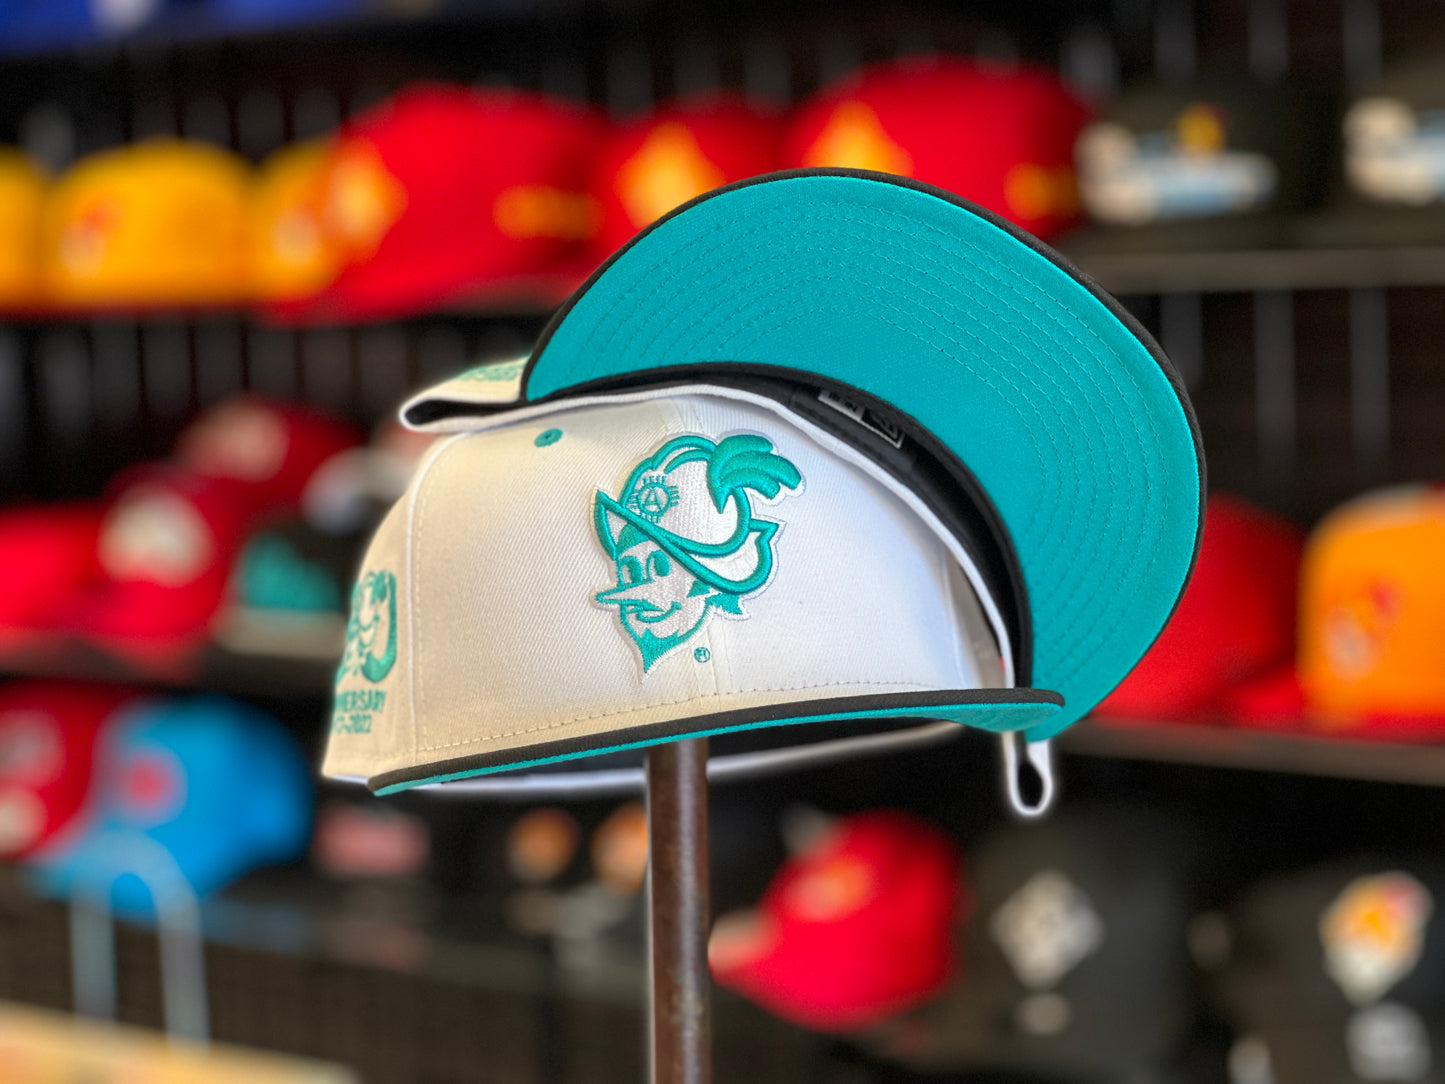 Albuquerque Dukes White Turquoise New Era 5950 Fitted Dukes 50 yr Patch